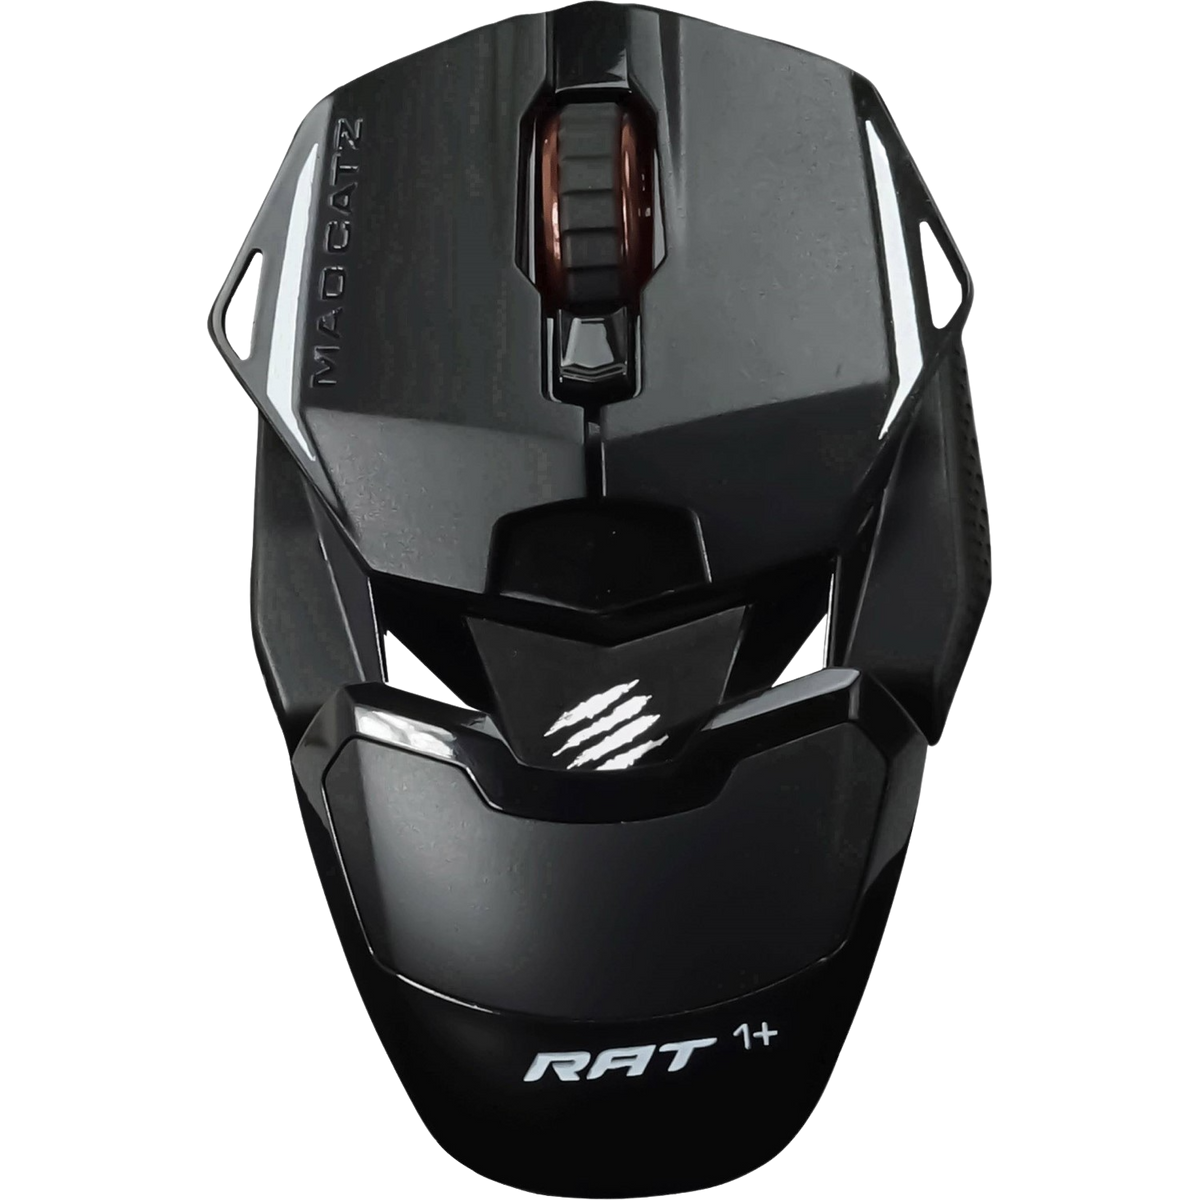 MAD CATZ MR01MCINBL000-0 R.A.T. Schwarz OPTICAL GAMING BL MOUSE, Gaming 1+ Maus